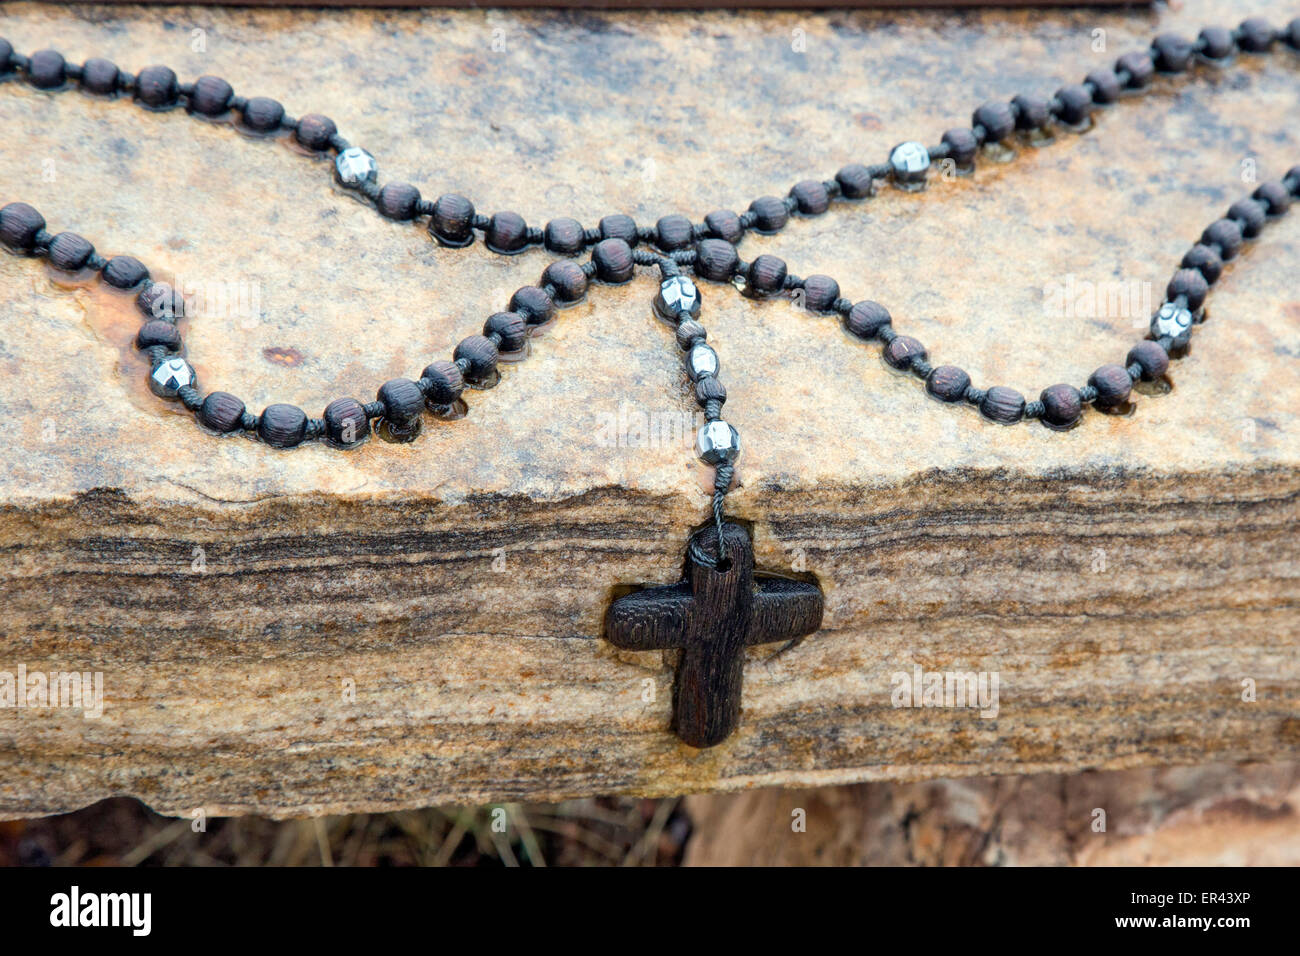 Virginia Dale, Colorado - A rosary on a rock on an outdoor trail at the Abbey of St. Walburga. Stock Photo